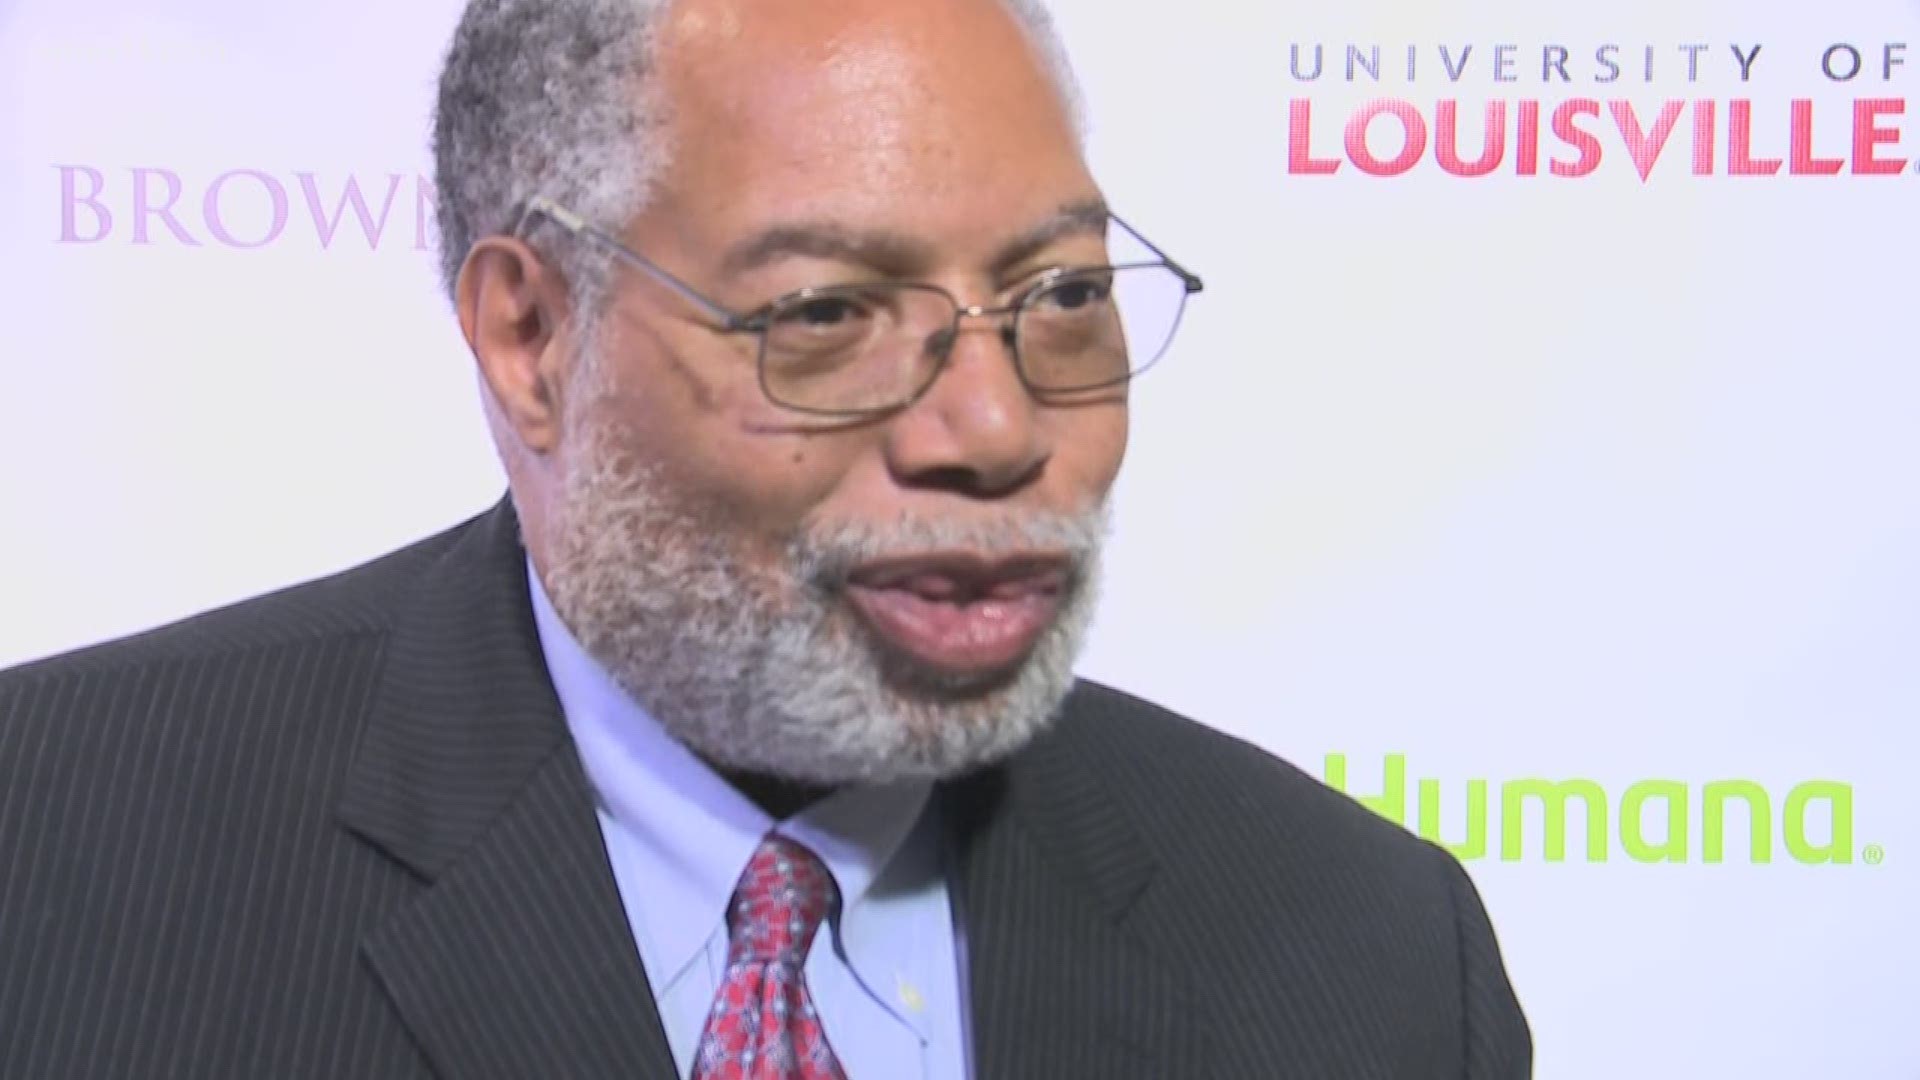 The event helped launch the center's first-ever quarterly membership event while also honoring Doctor Lonnie Bunch.